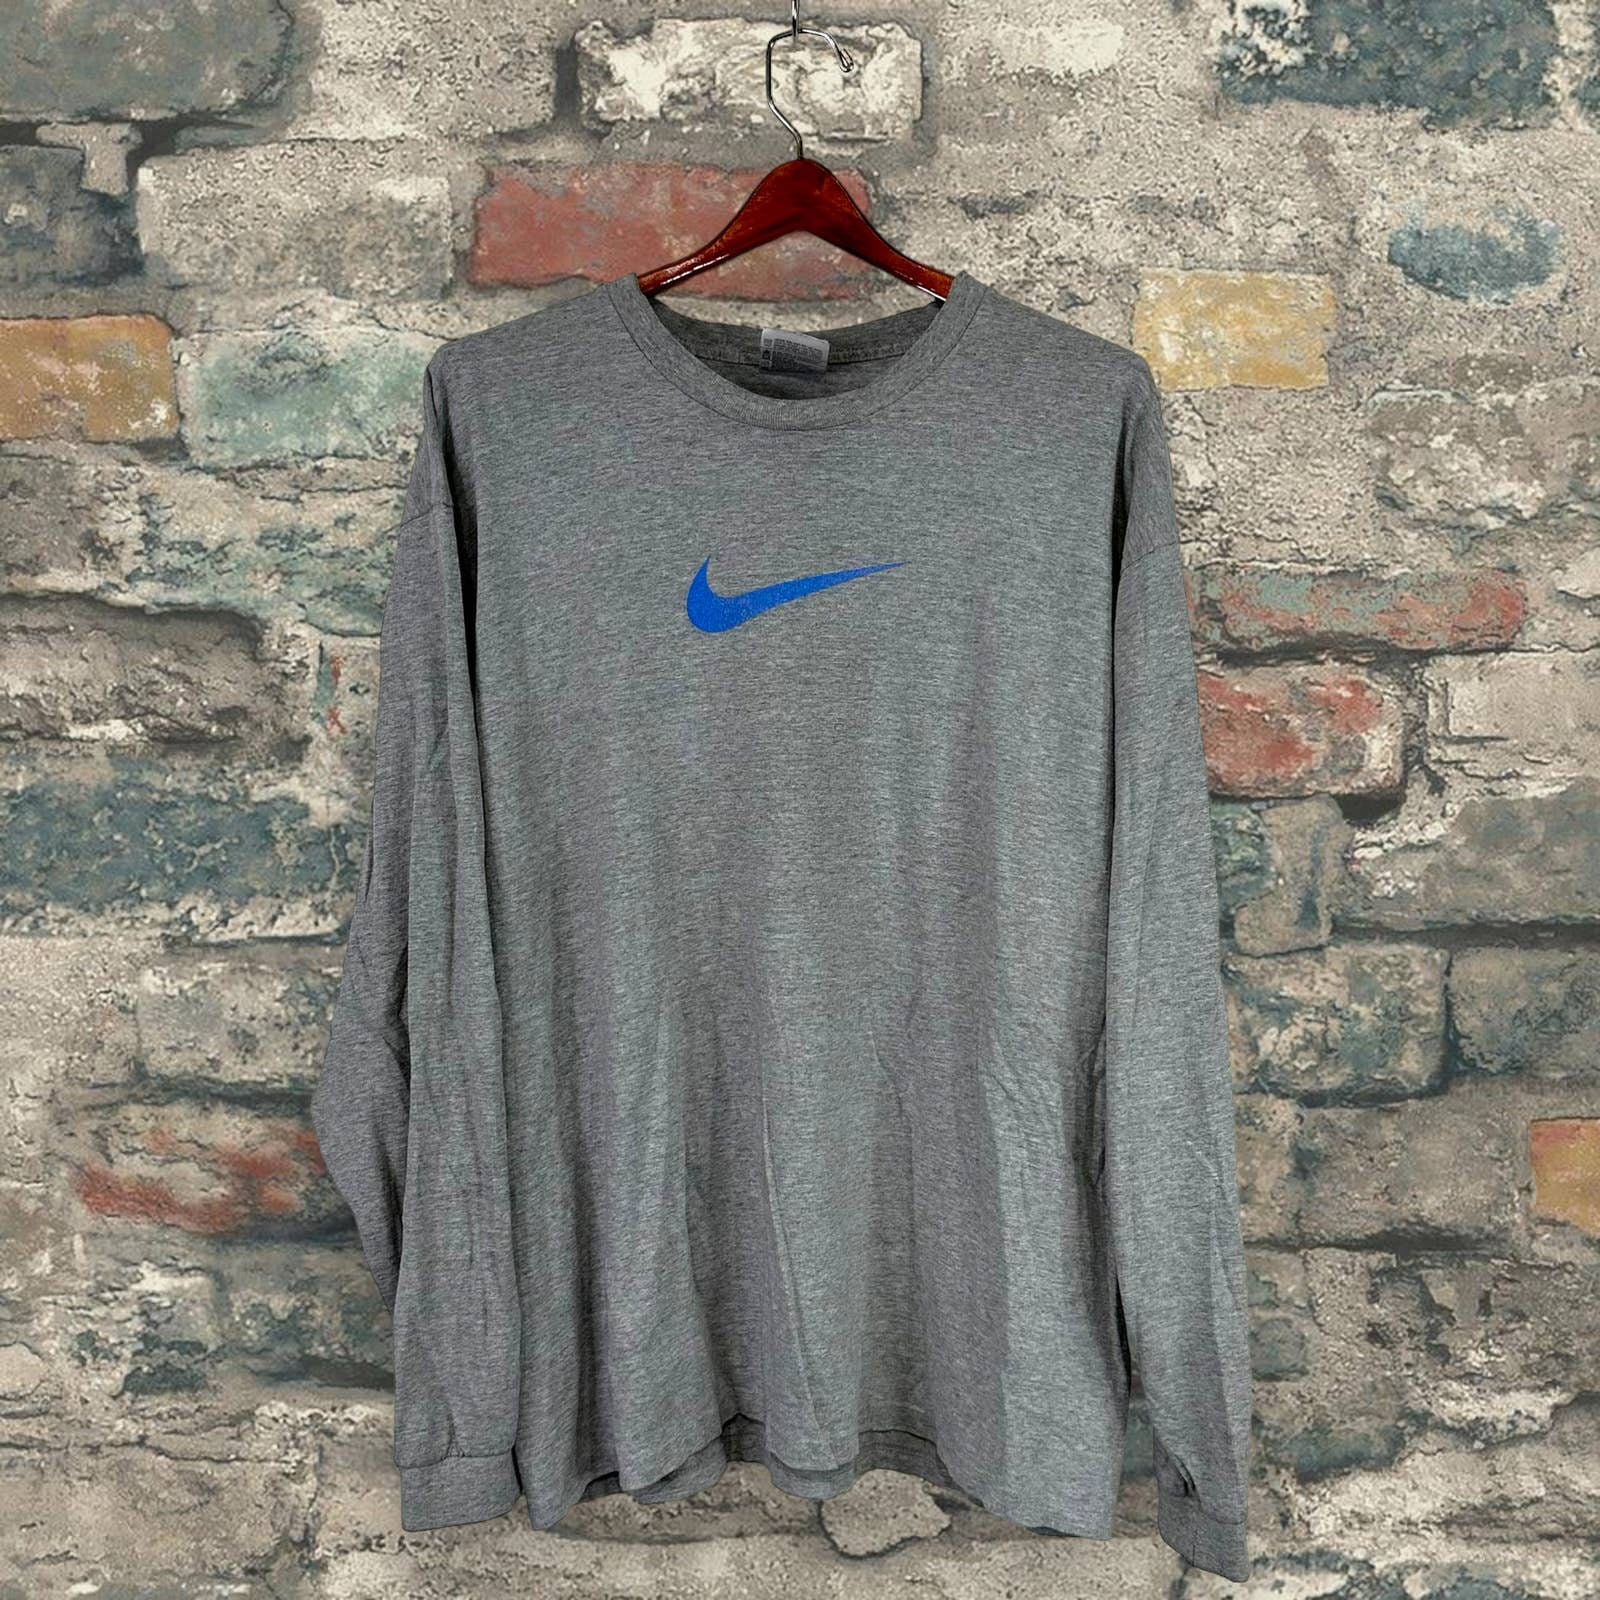 VINTAGE NIKE BASKETBALL CENTER SWOOSH 90s Silver TAG T SHIRT large polyester